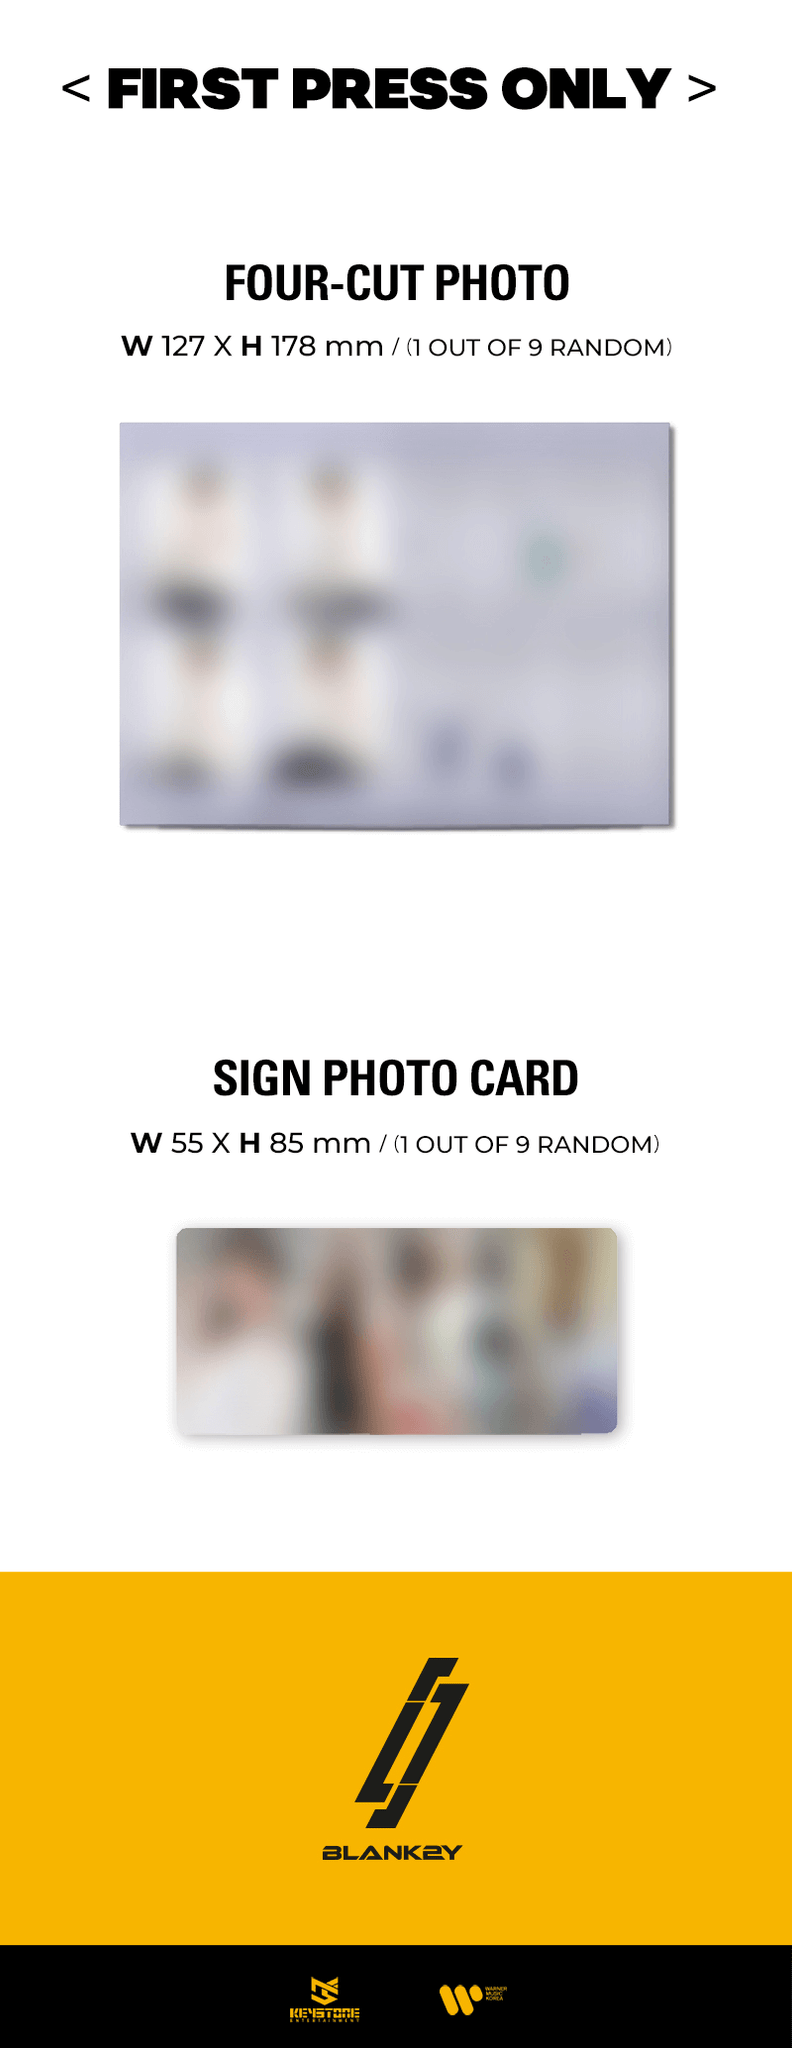 BLANK2Y K2Y I : CONFIDENCE 'Thumbs Up' 1st Press Only 4Cut Photo Sign Photocard